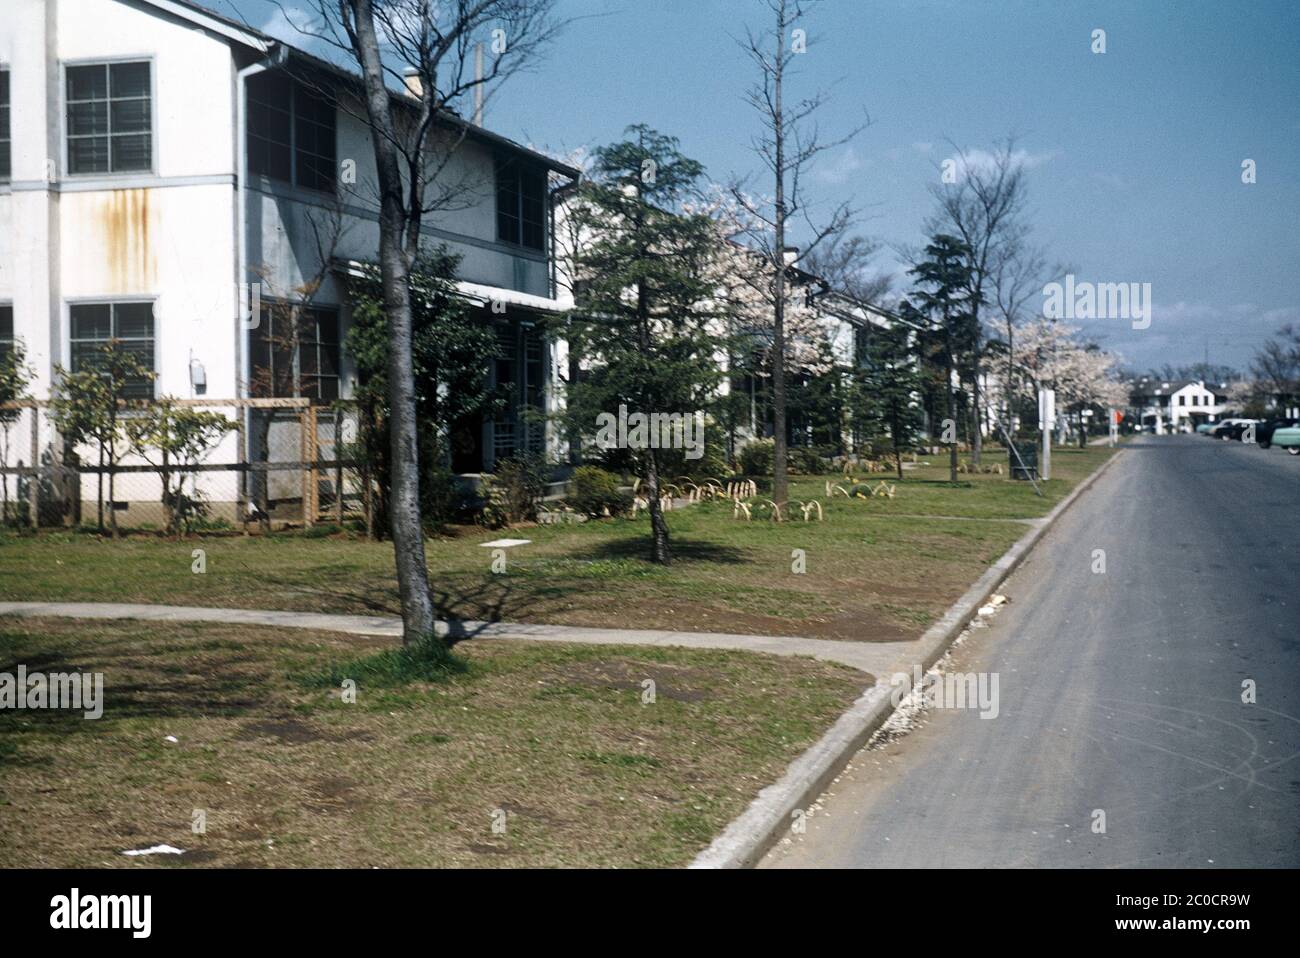 [ 1950s Japan - US Military Housing ] — US Military Housing in the Tokyo area, ca. 1950s.  According to a photo in the book Dependents Housing Japan & Korea, published in 1948 (Showa 23), the house on this image is a Duplex A-1a.  The design was used at Washington Heights, a United States Armed Forces housing complex located in Shibuya, Tokyo during the Allied occupation of Japan.  The complex was used as athlete housing during the 1964 Summer Olympics. After the Olympics, the area became Yoyogi Park.  20th century vintage slide film. Stock Photo